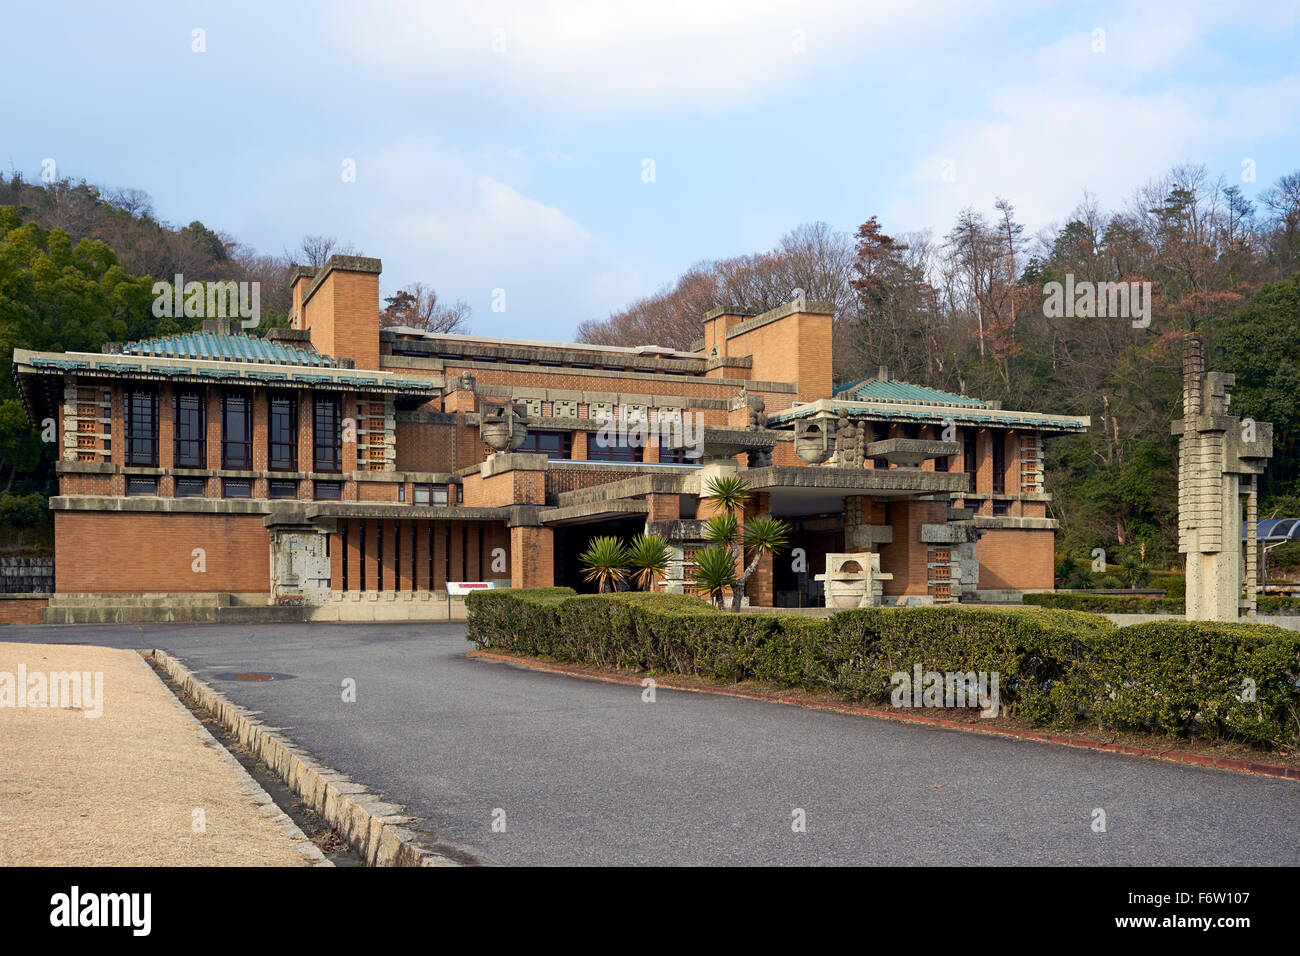 Frank Lloyd Wright's Imperial Hotel in Giappone Foto Stock